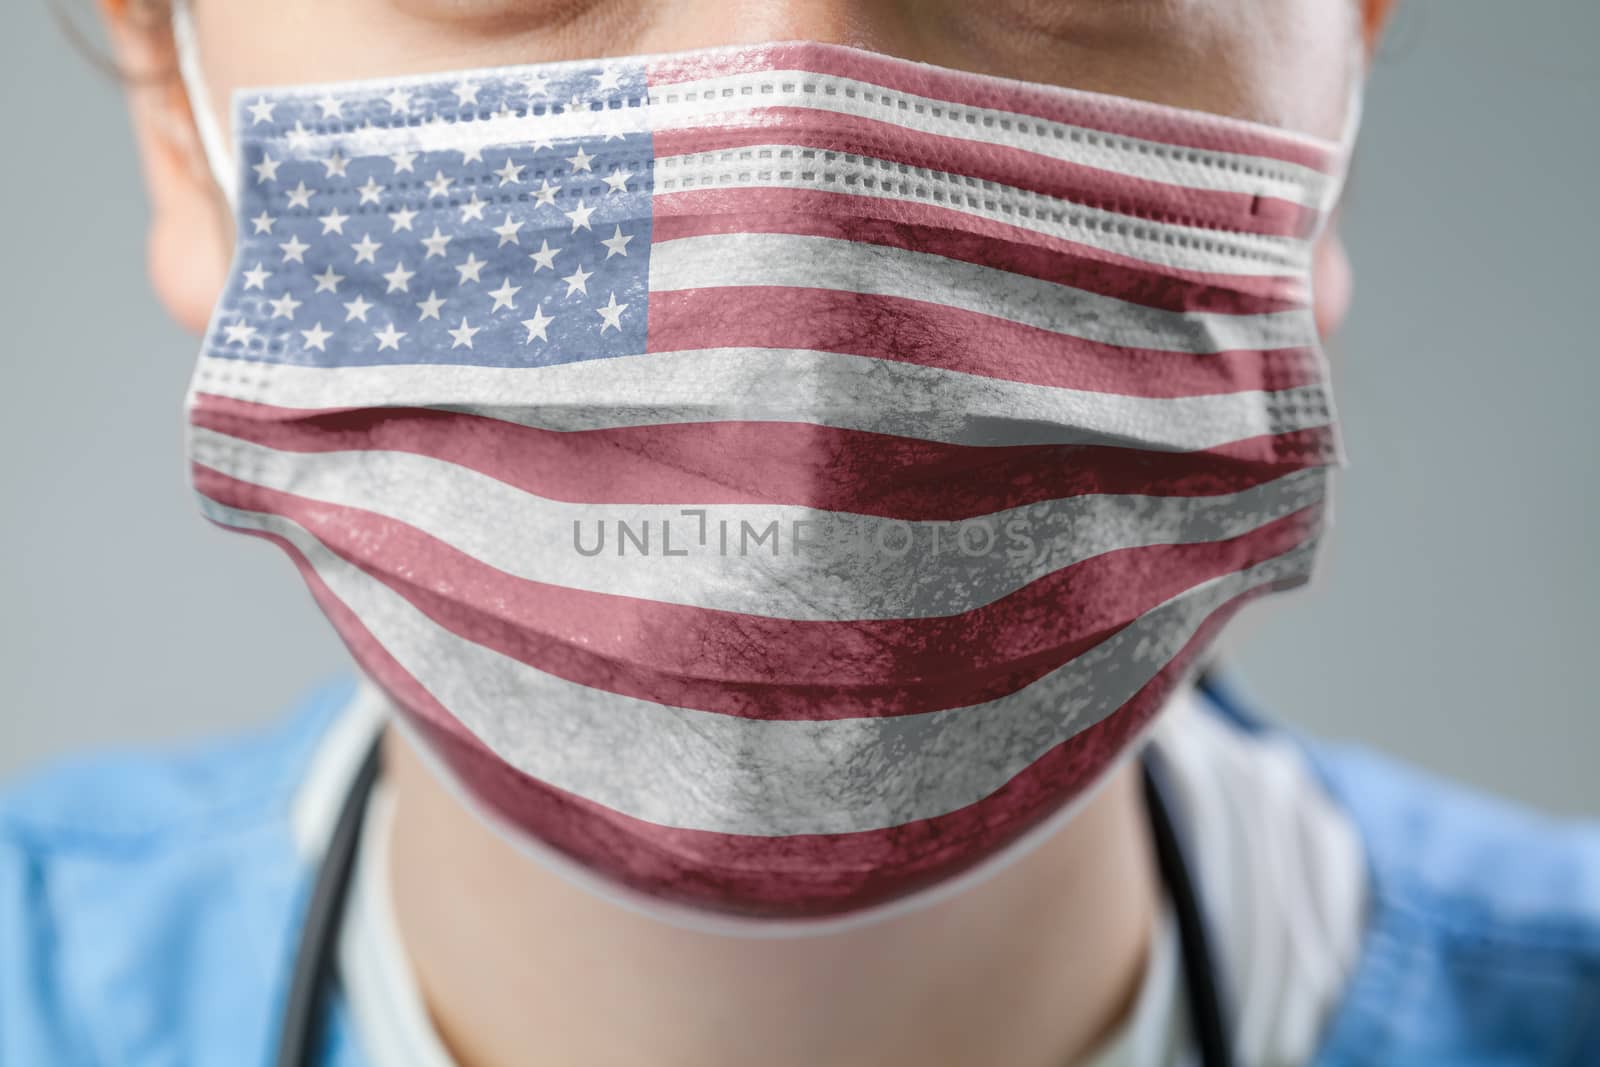 USA flag printed on face mask by Plyushkin